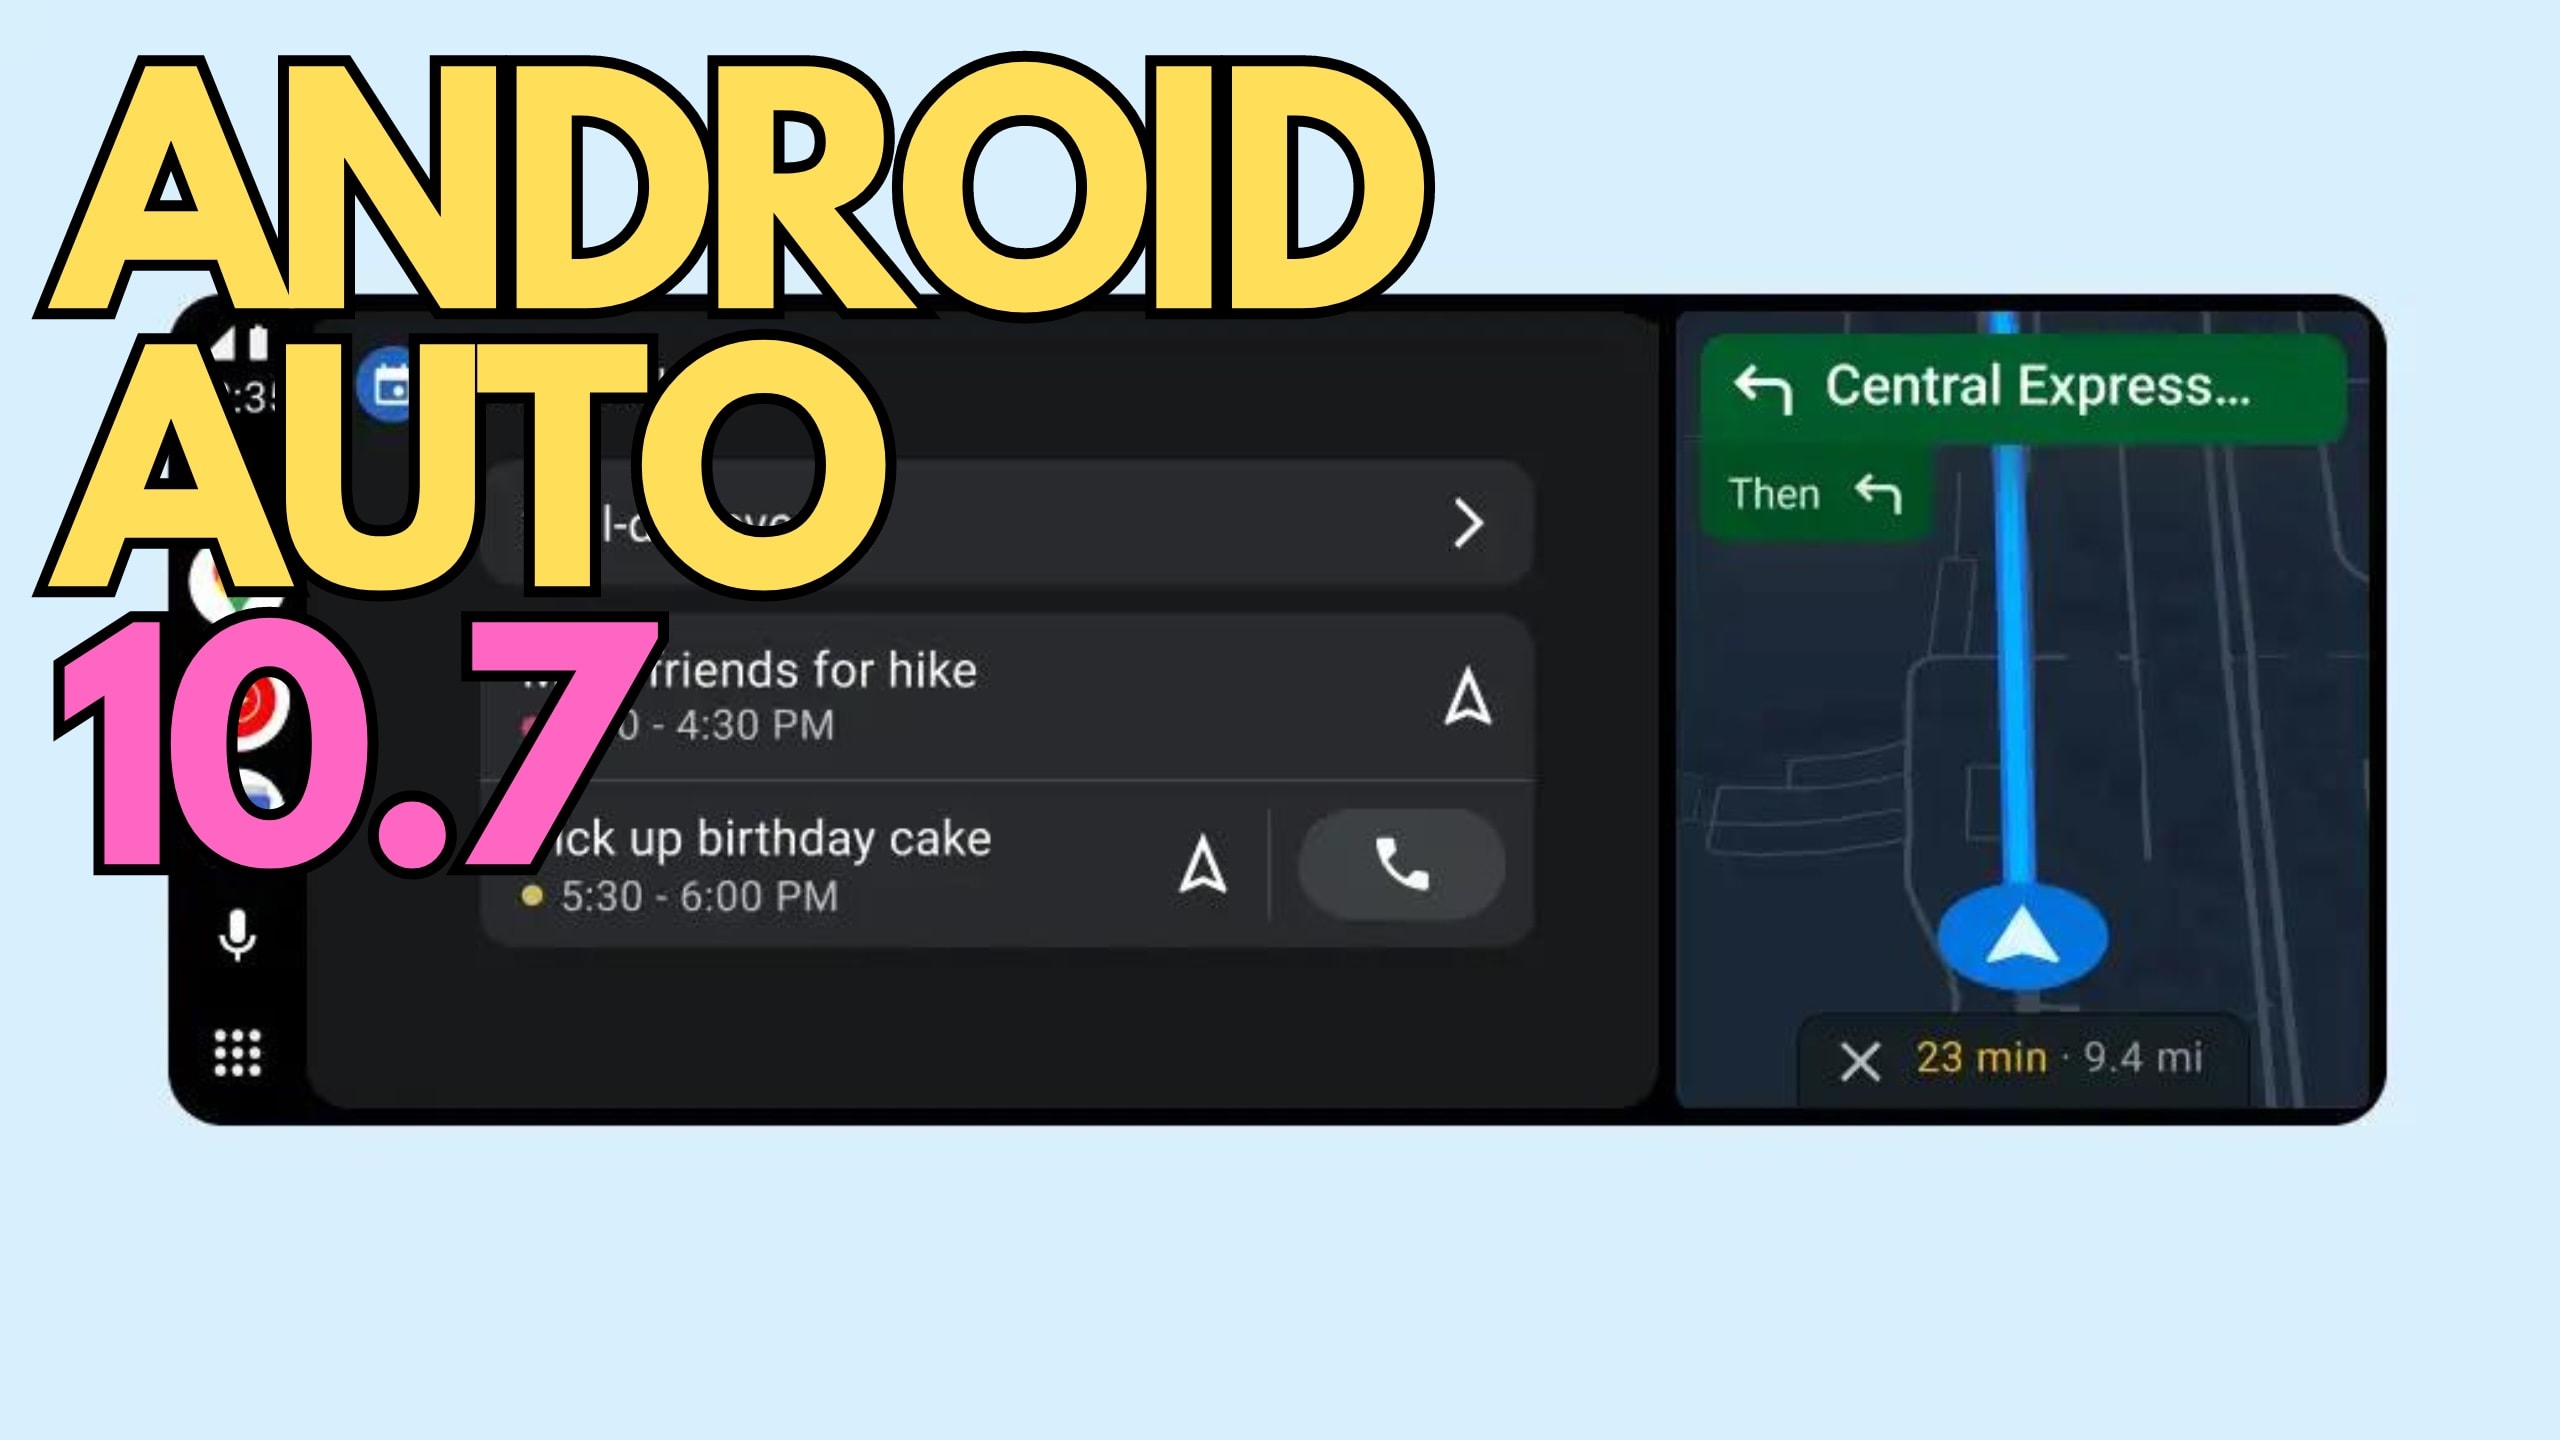 The best ways to Download Google Play Store APK's/App's – CK's Technology  News